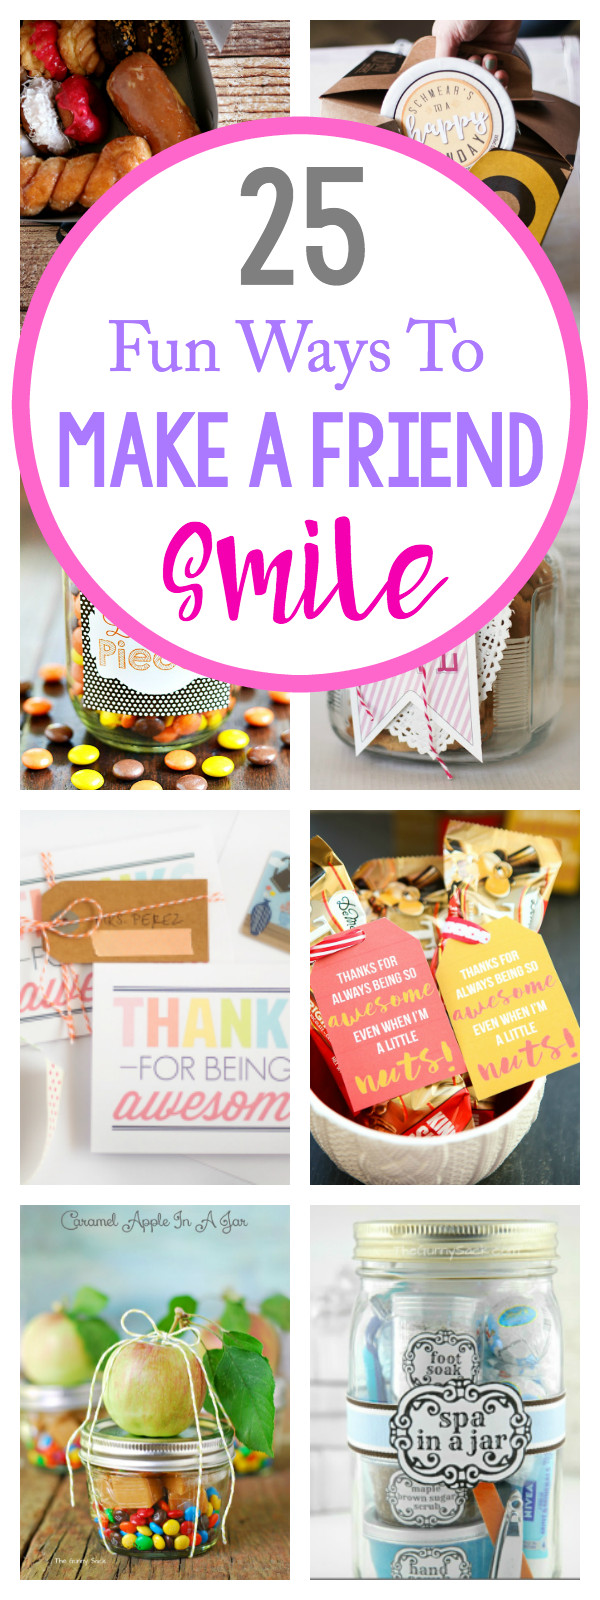 Gifts For Friends DIY
 Cute Gifts for Friends for Any Occasion – Fun Squared